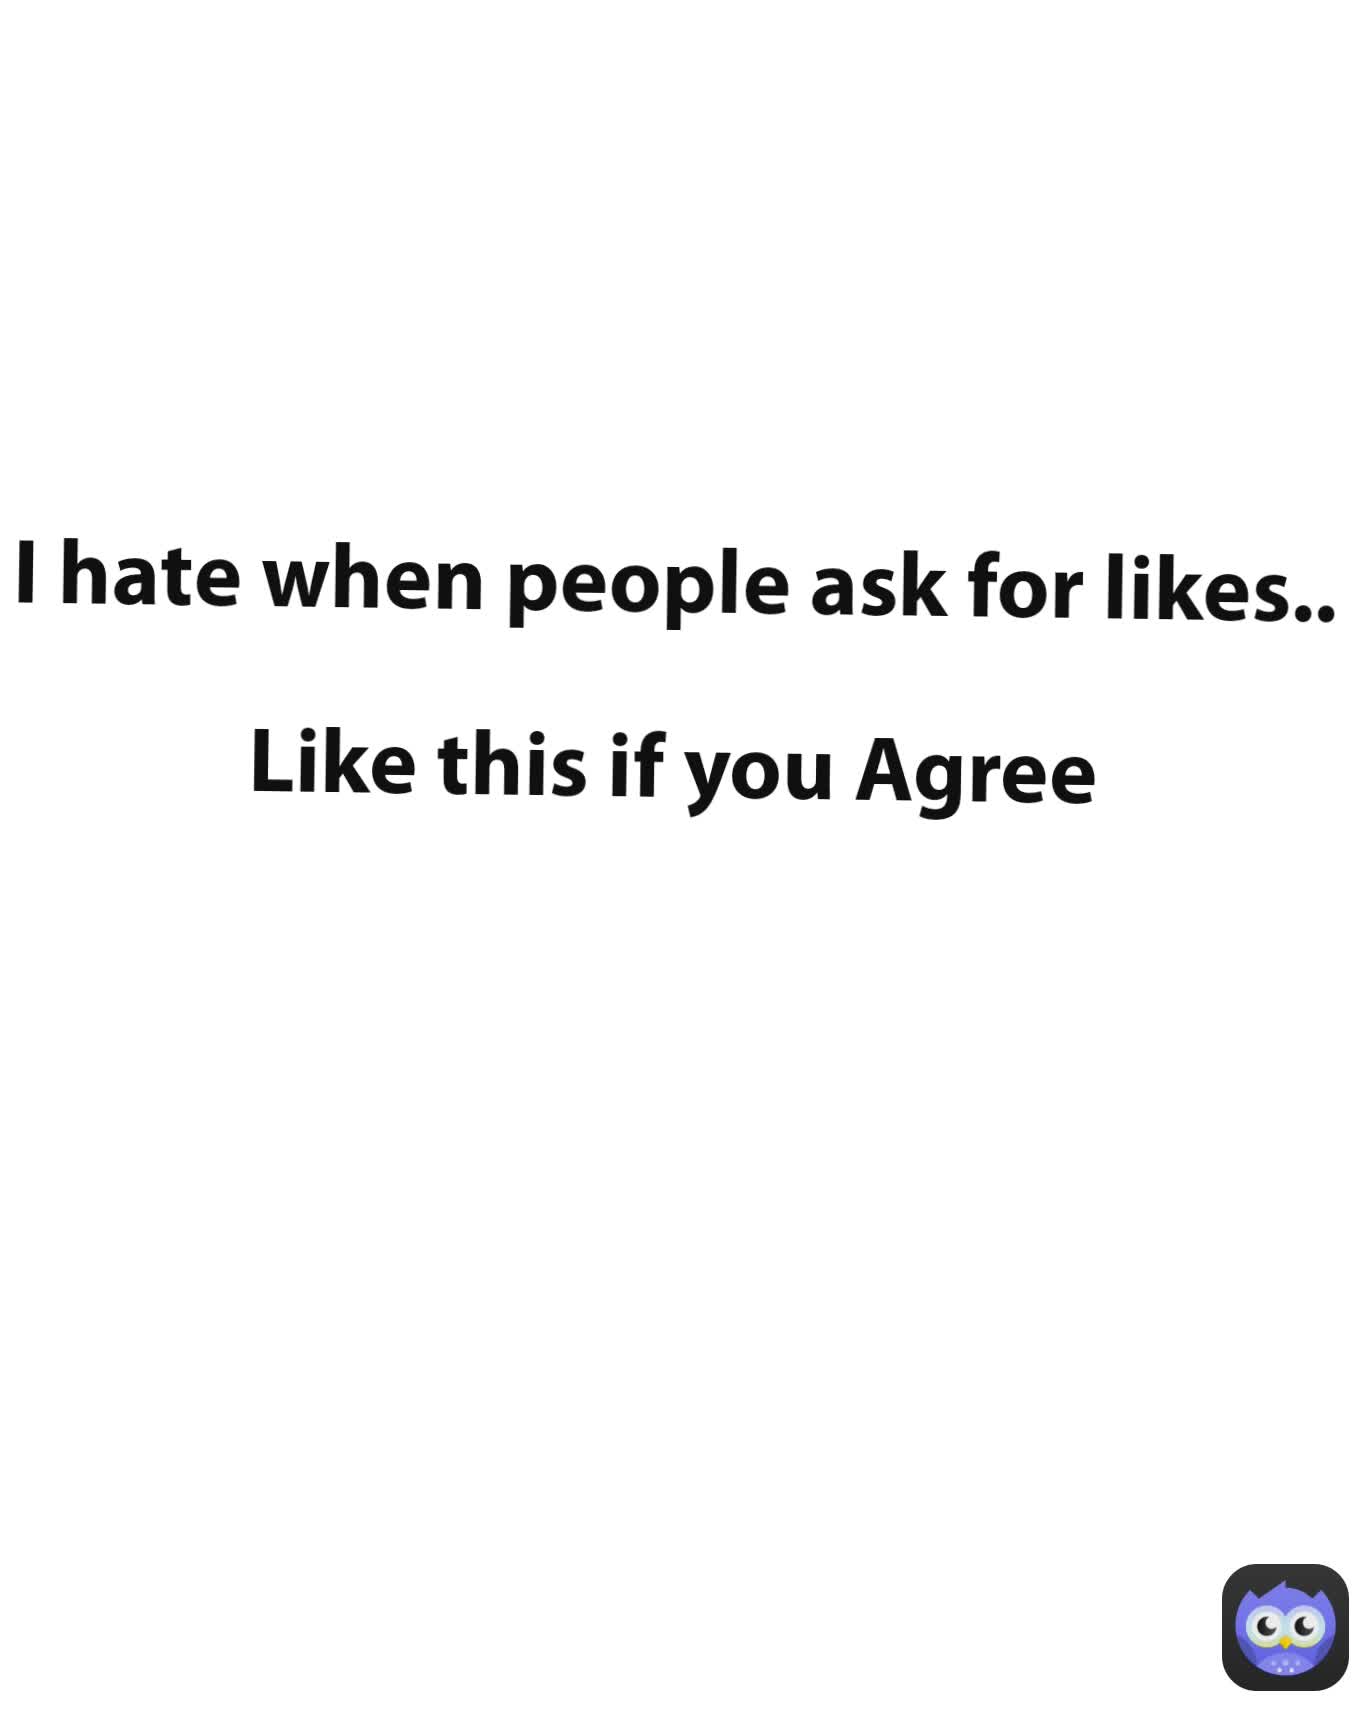 I hate when people ask for likes..

Like this if you Agree